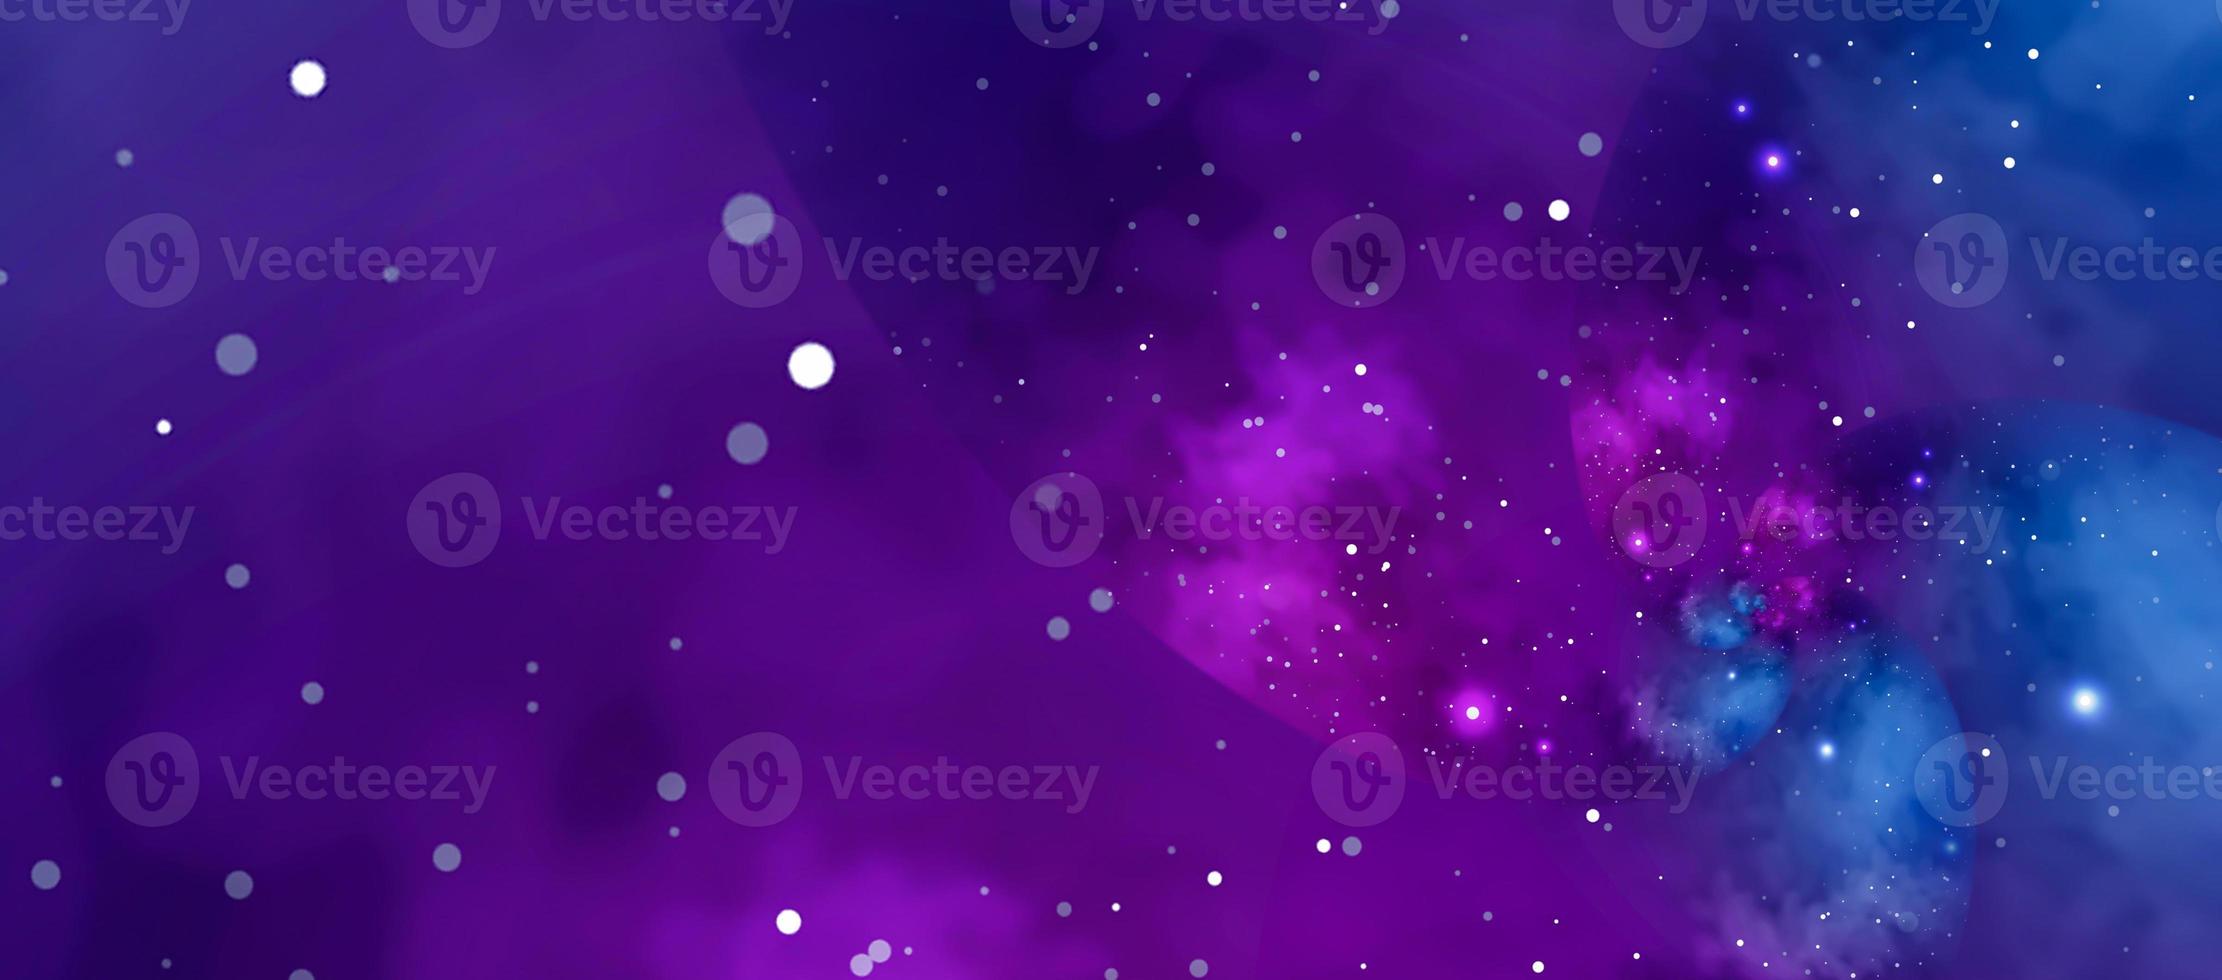 Starry background with blue and violet nebula. Concept for space, astronomy, galaxy, universe, science photo